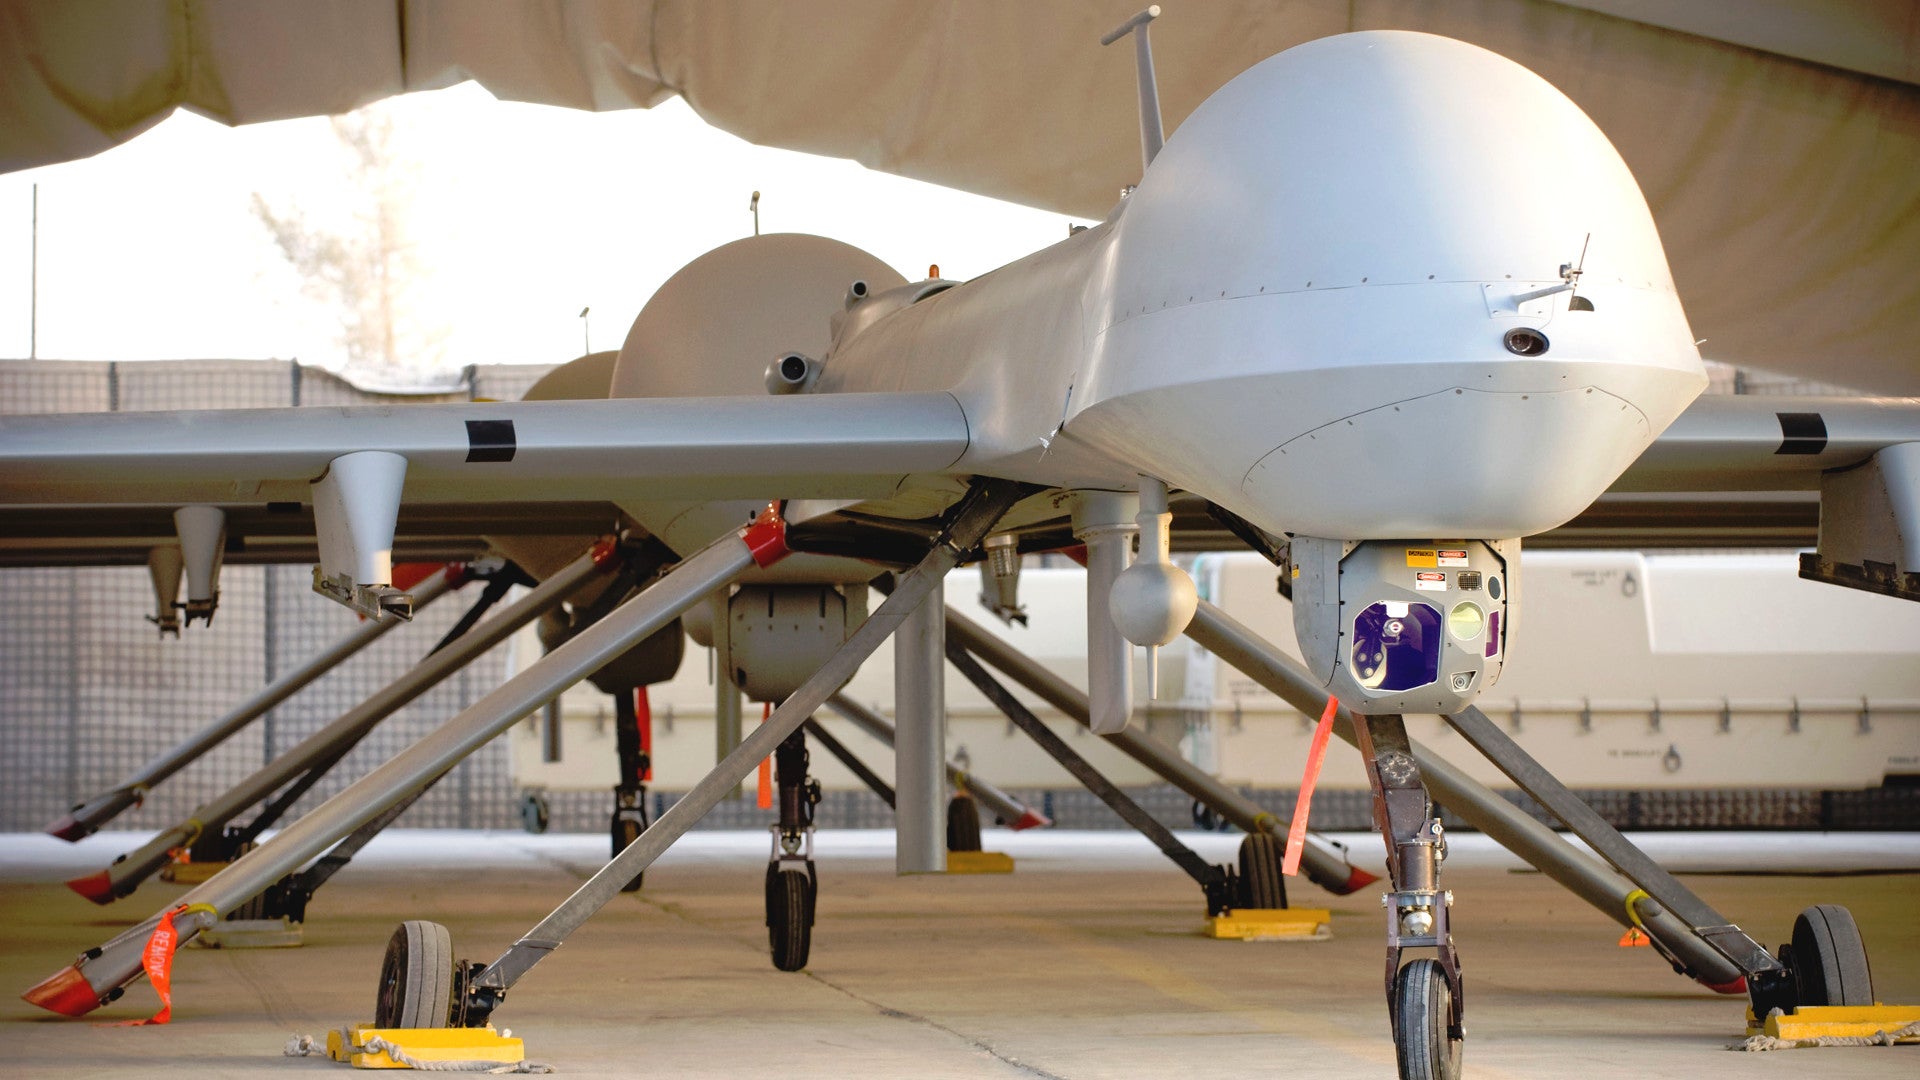 The US Navy May End Up Flying the Air Force’s Unwanted MQ-1 Predator Drones